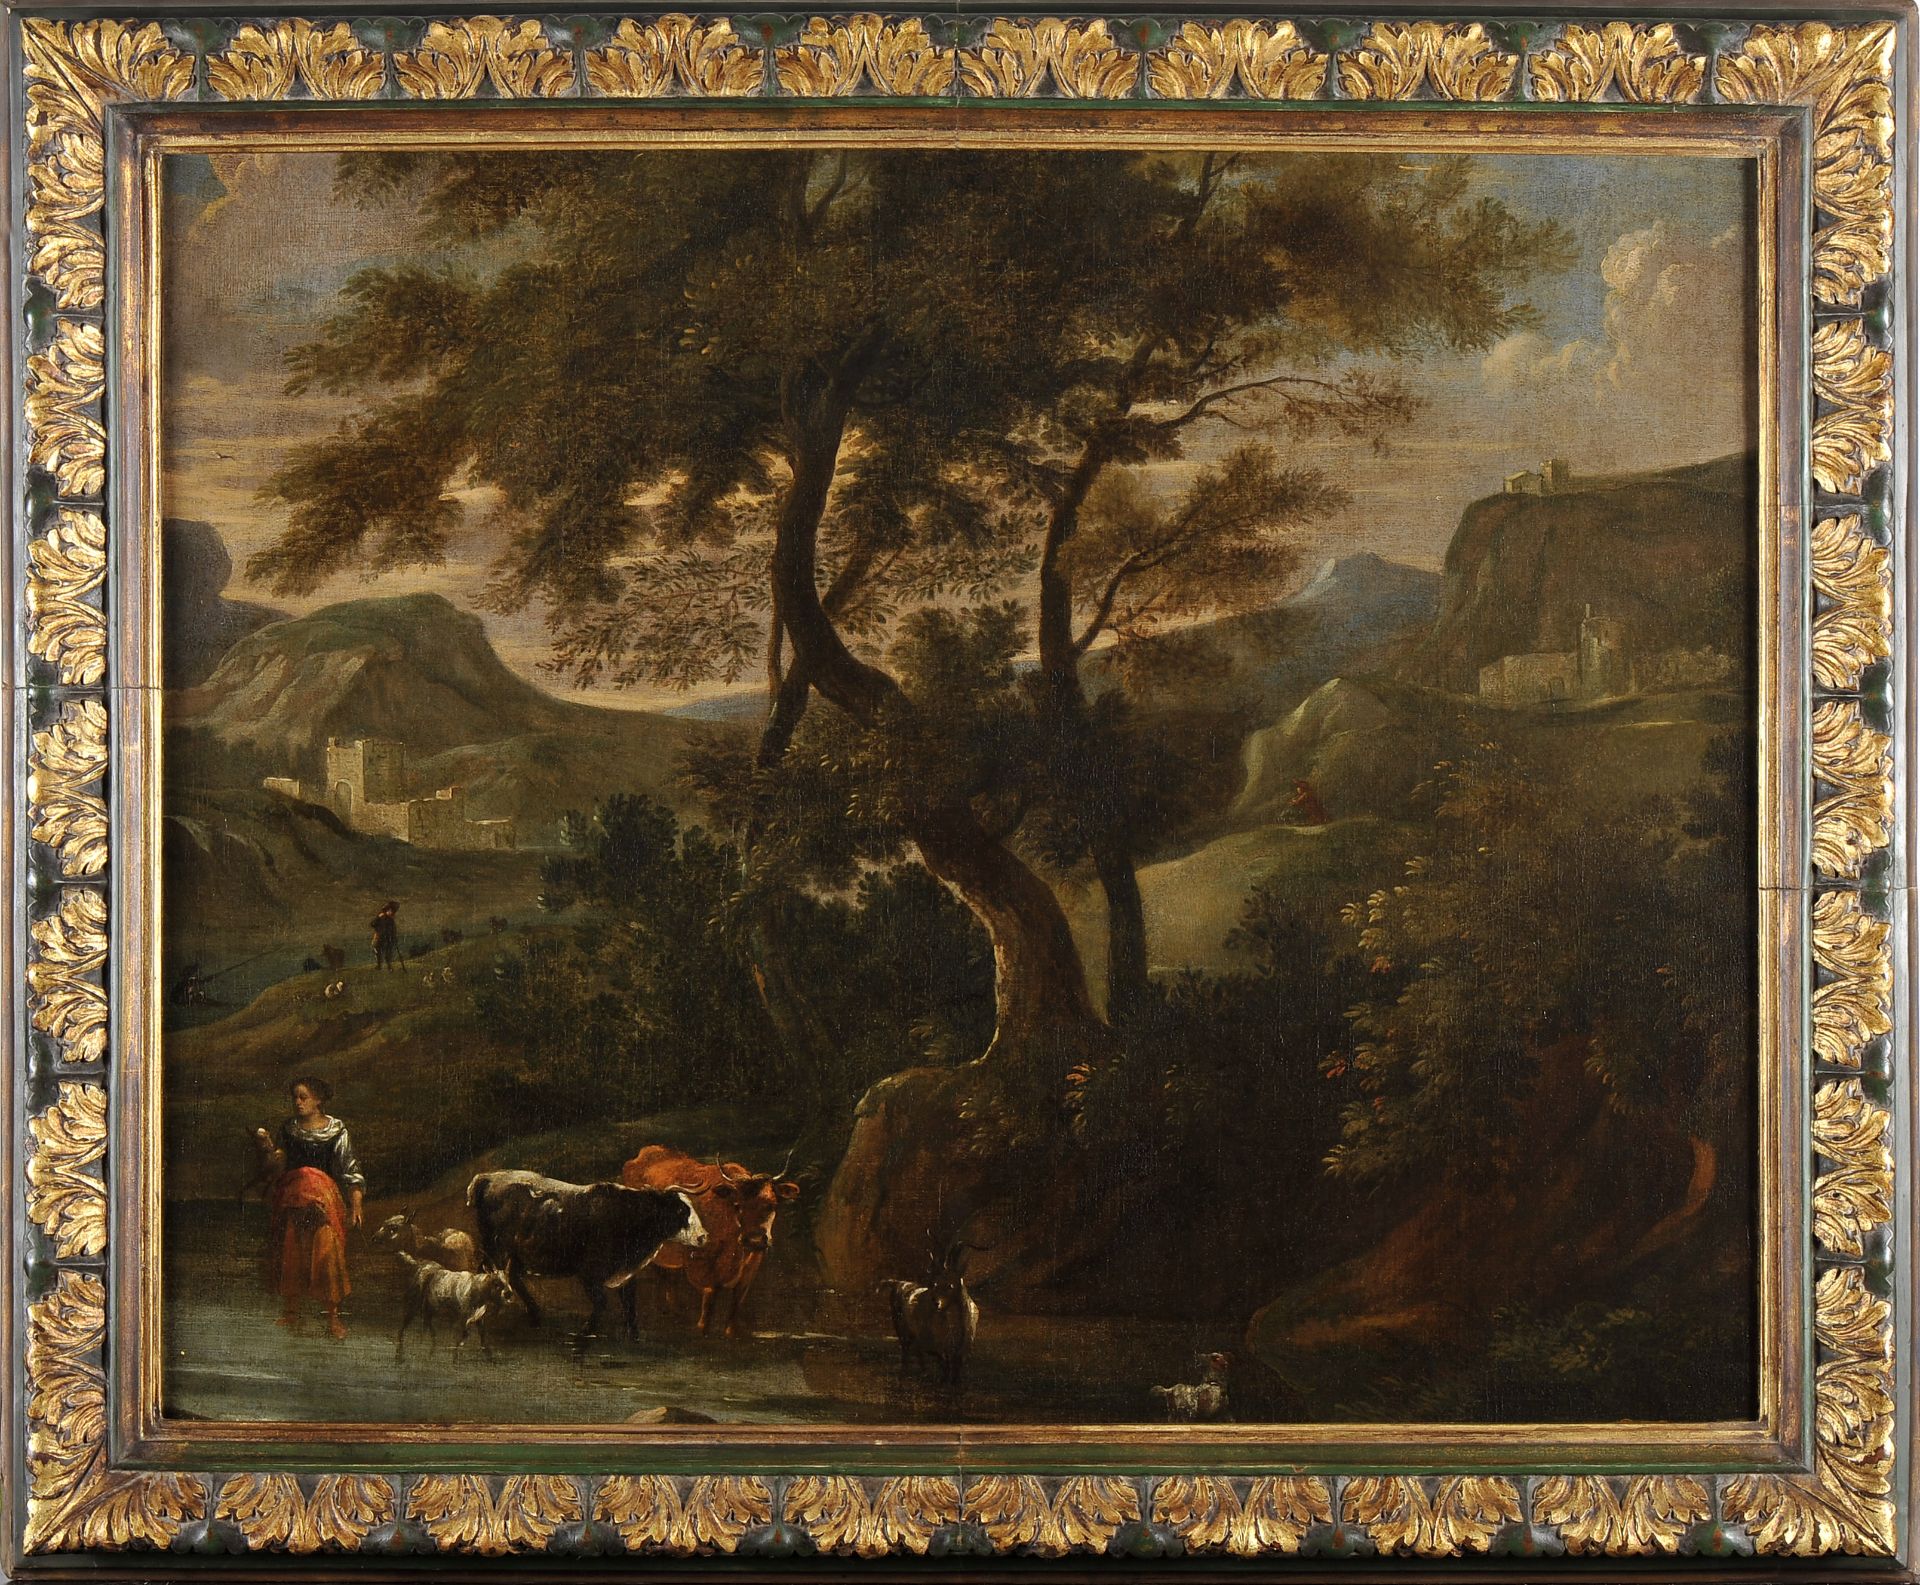 Landscape - Shepherds and cattle by the castle